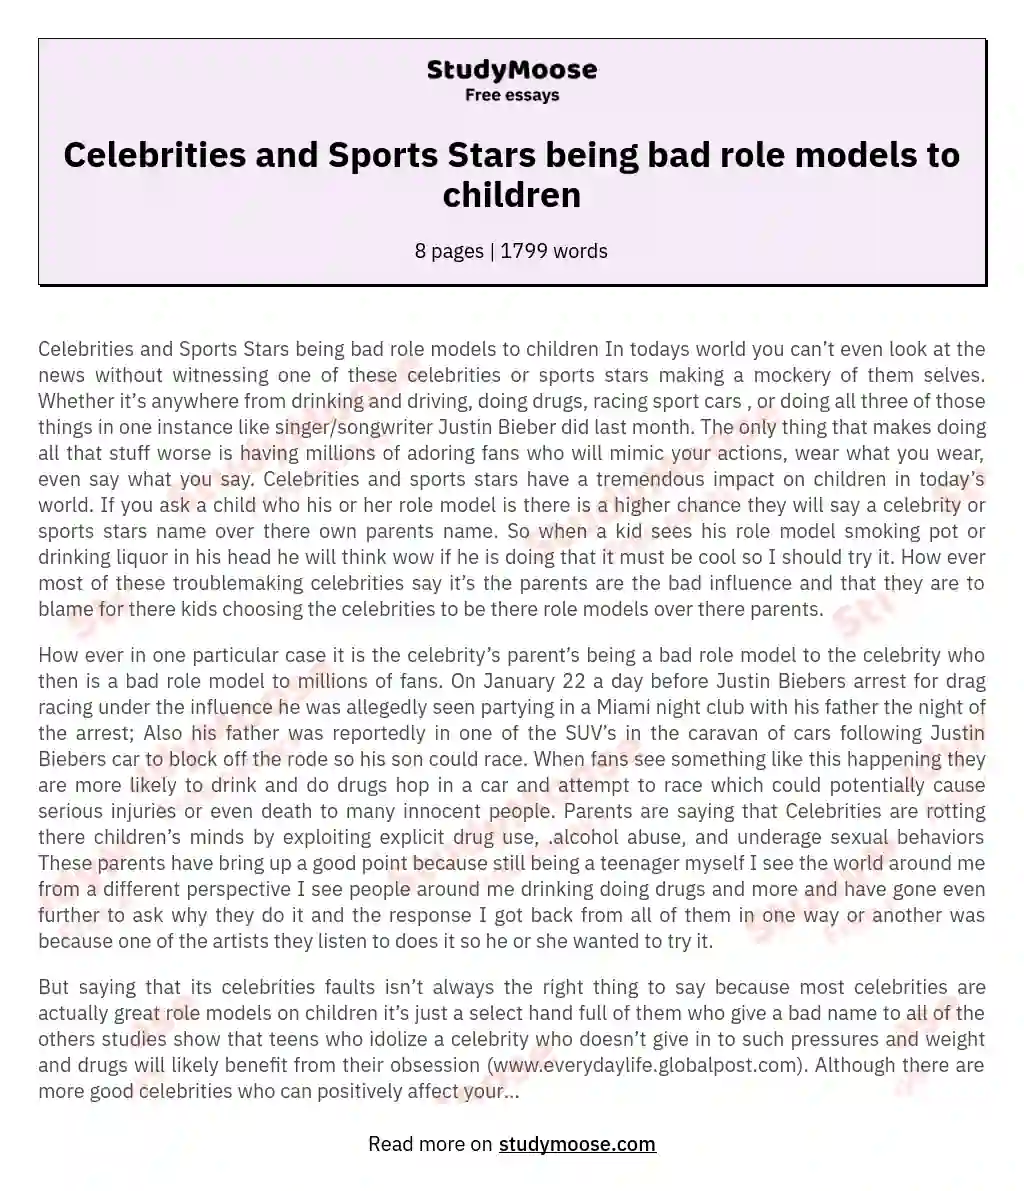 Celebrities and Sports Stars being bad role models to children essay